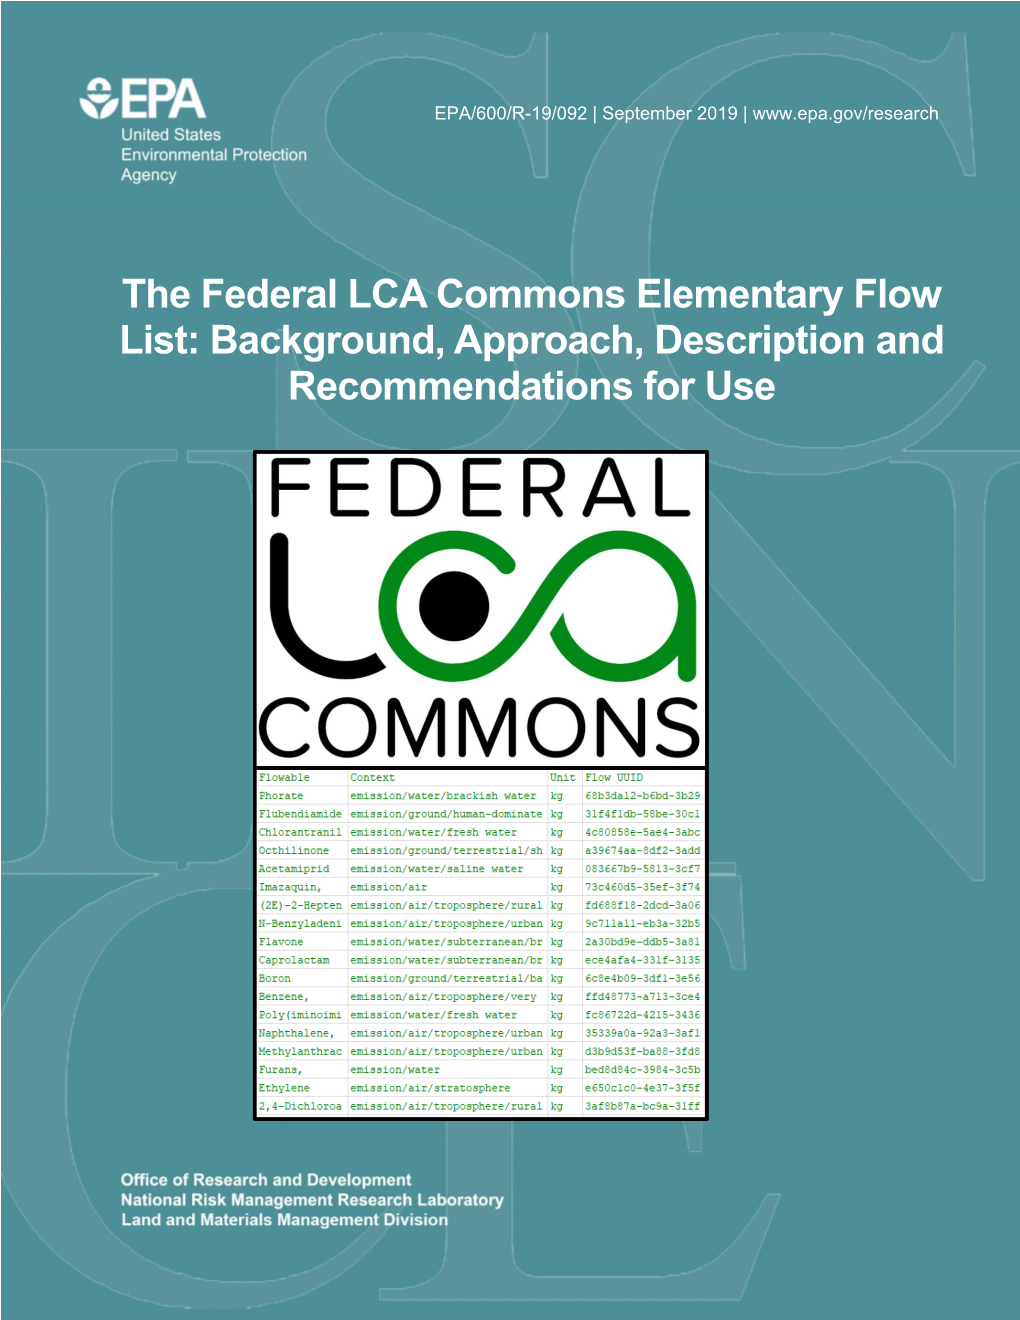 Federal LCA Commons Elementary Flow List: Background, Approach, Description and Recommendations for Use